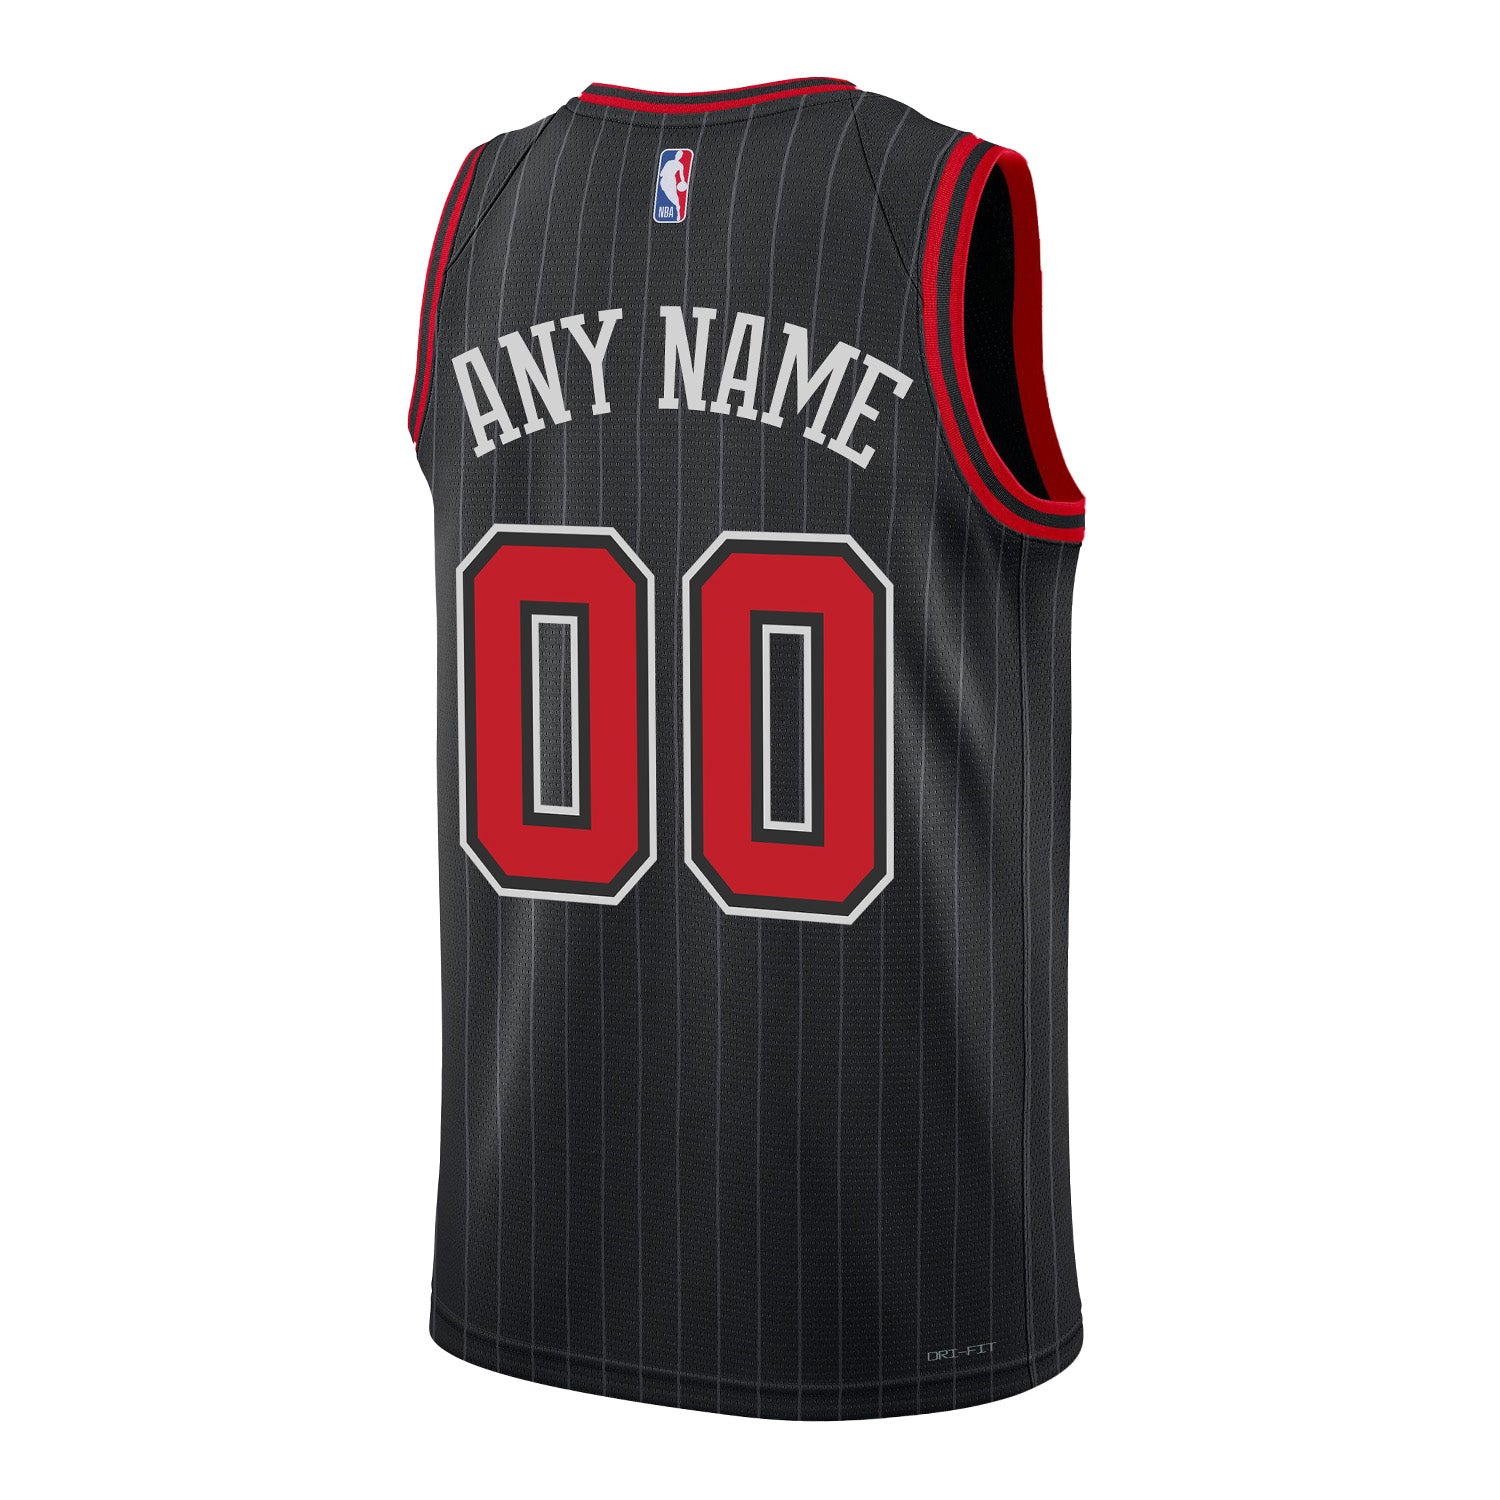 Youth Chicago Bulls Personalized Nike Statement Swingman Jersey in black - back view